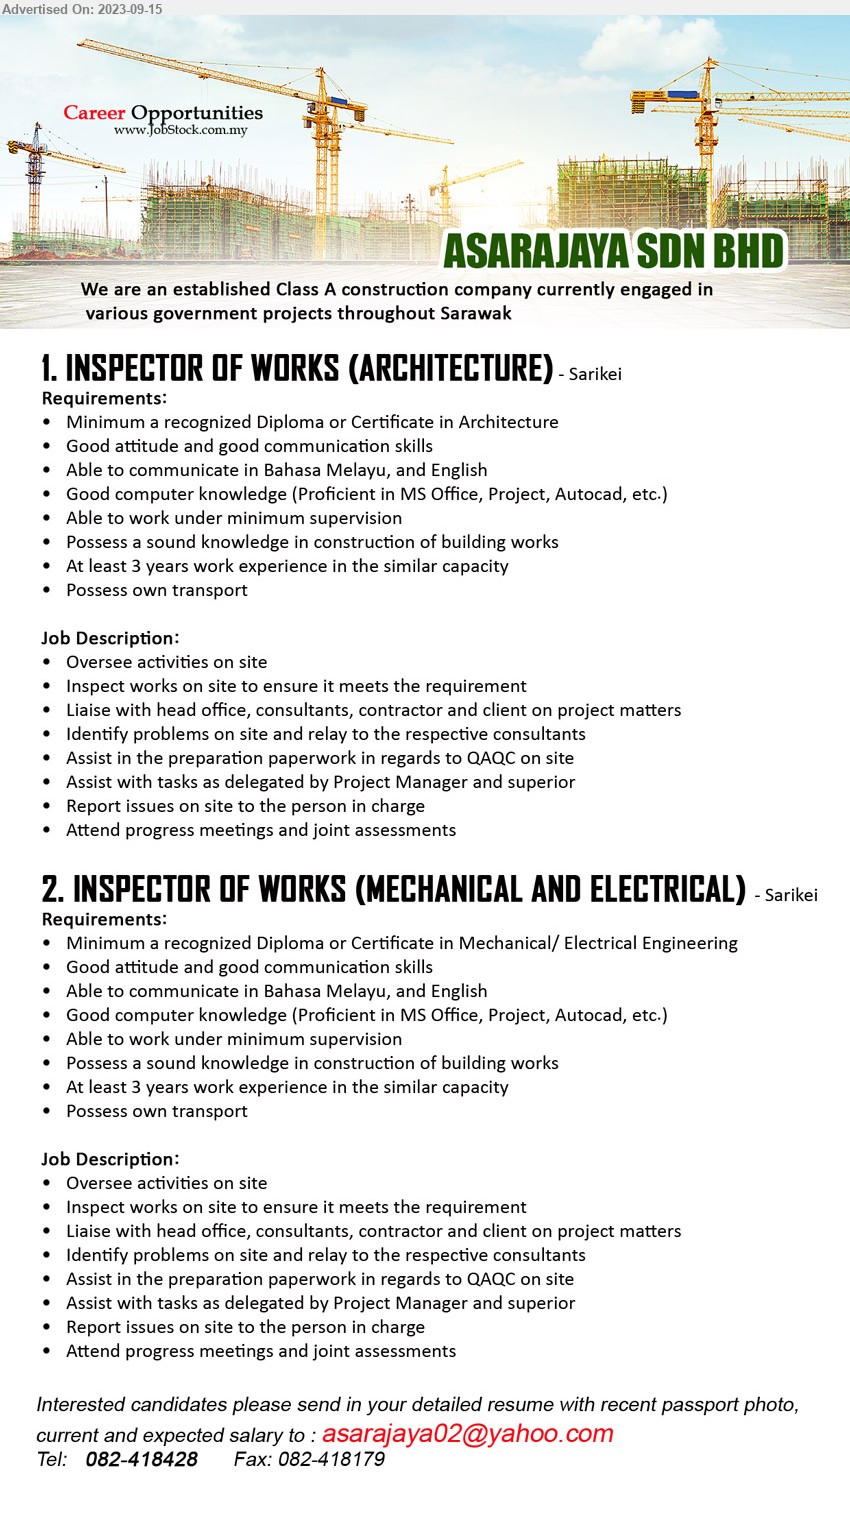 ASARAJAYA SDN BHD - 1. INSPECTOR OF WORKS (ARCHITECTURE) (Sarikei), Diploma or Certificate in Architecture, Good computer knowledge (Proficient in MS Office, Project, Autocad, etc.),...
2. INSPECTOR OF WORKS (MECHANICAL AND ELECTRICAL) (Sarikei), Diploma or Certificate in Mechanical/ Electrical Engineering, Good computer knowledge,...
Call 082-418428 / Email resume to ...
